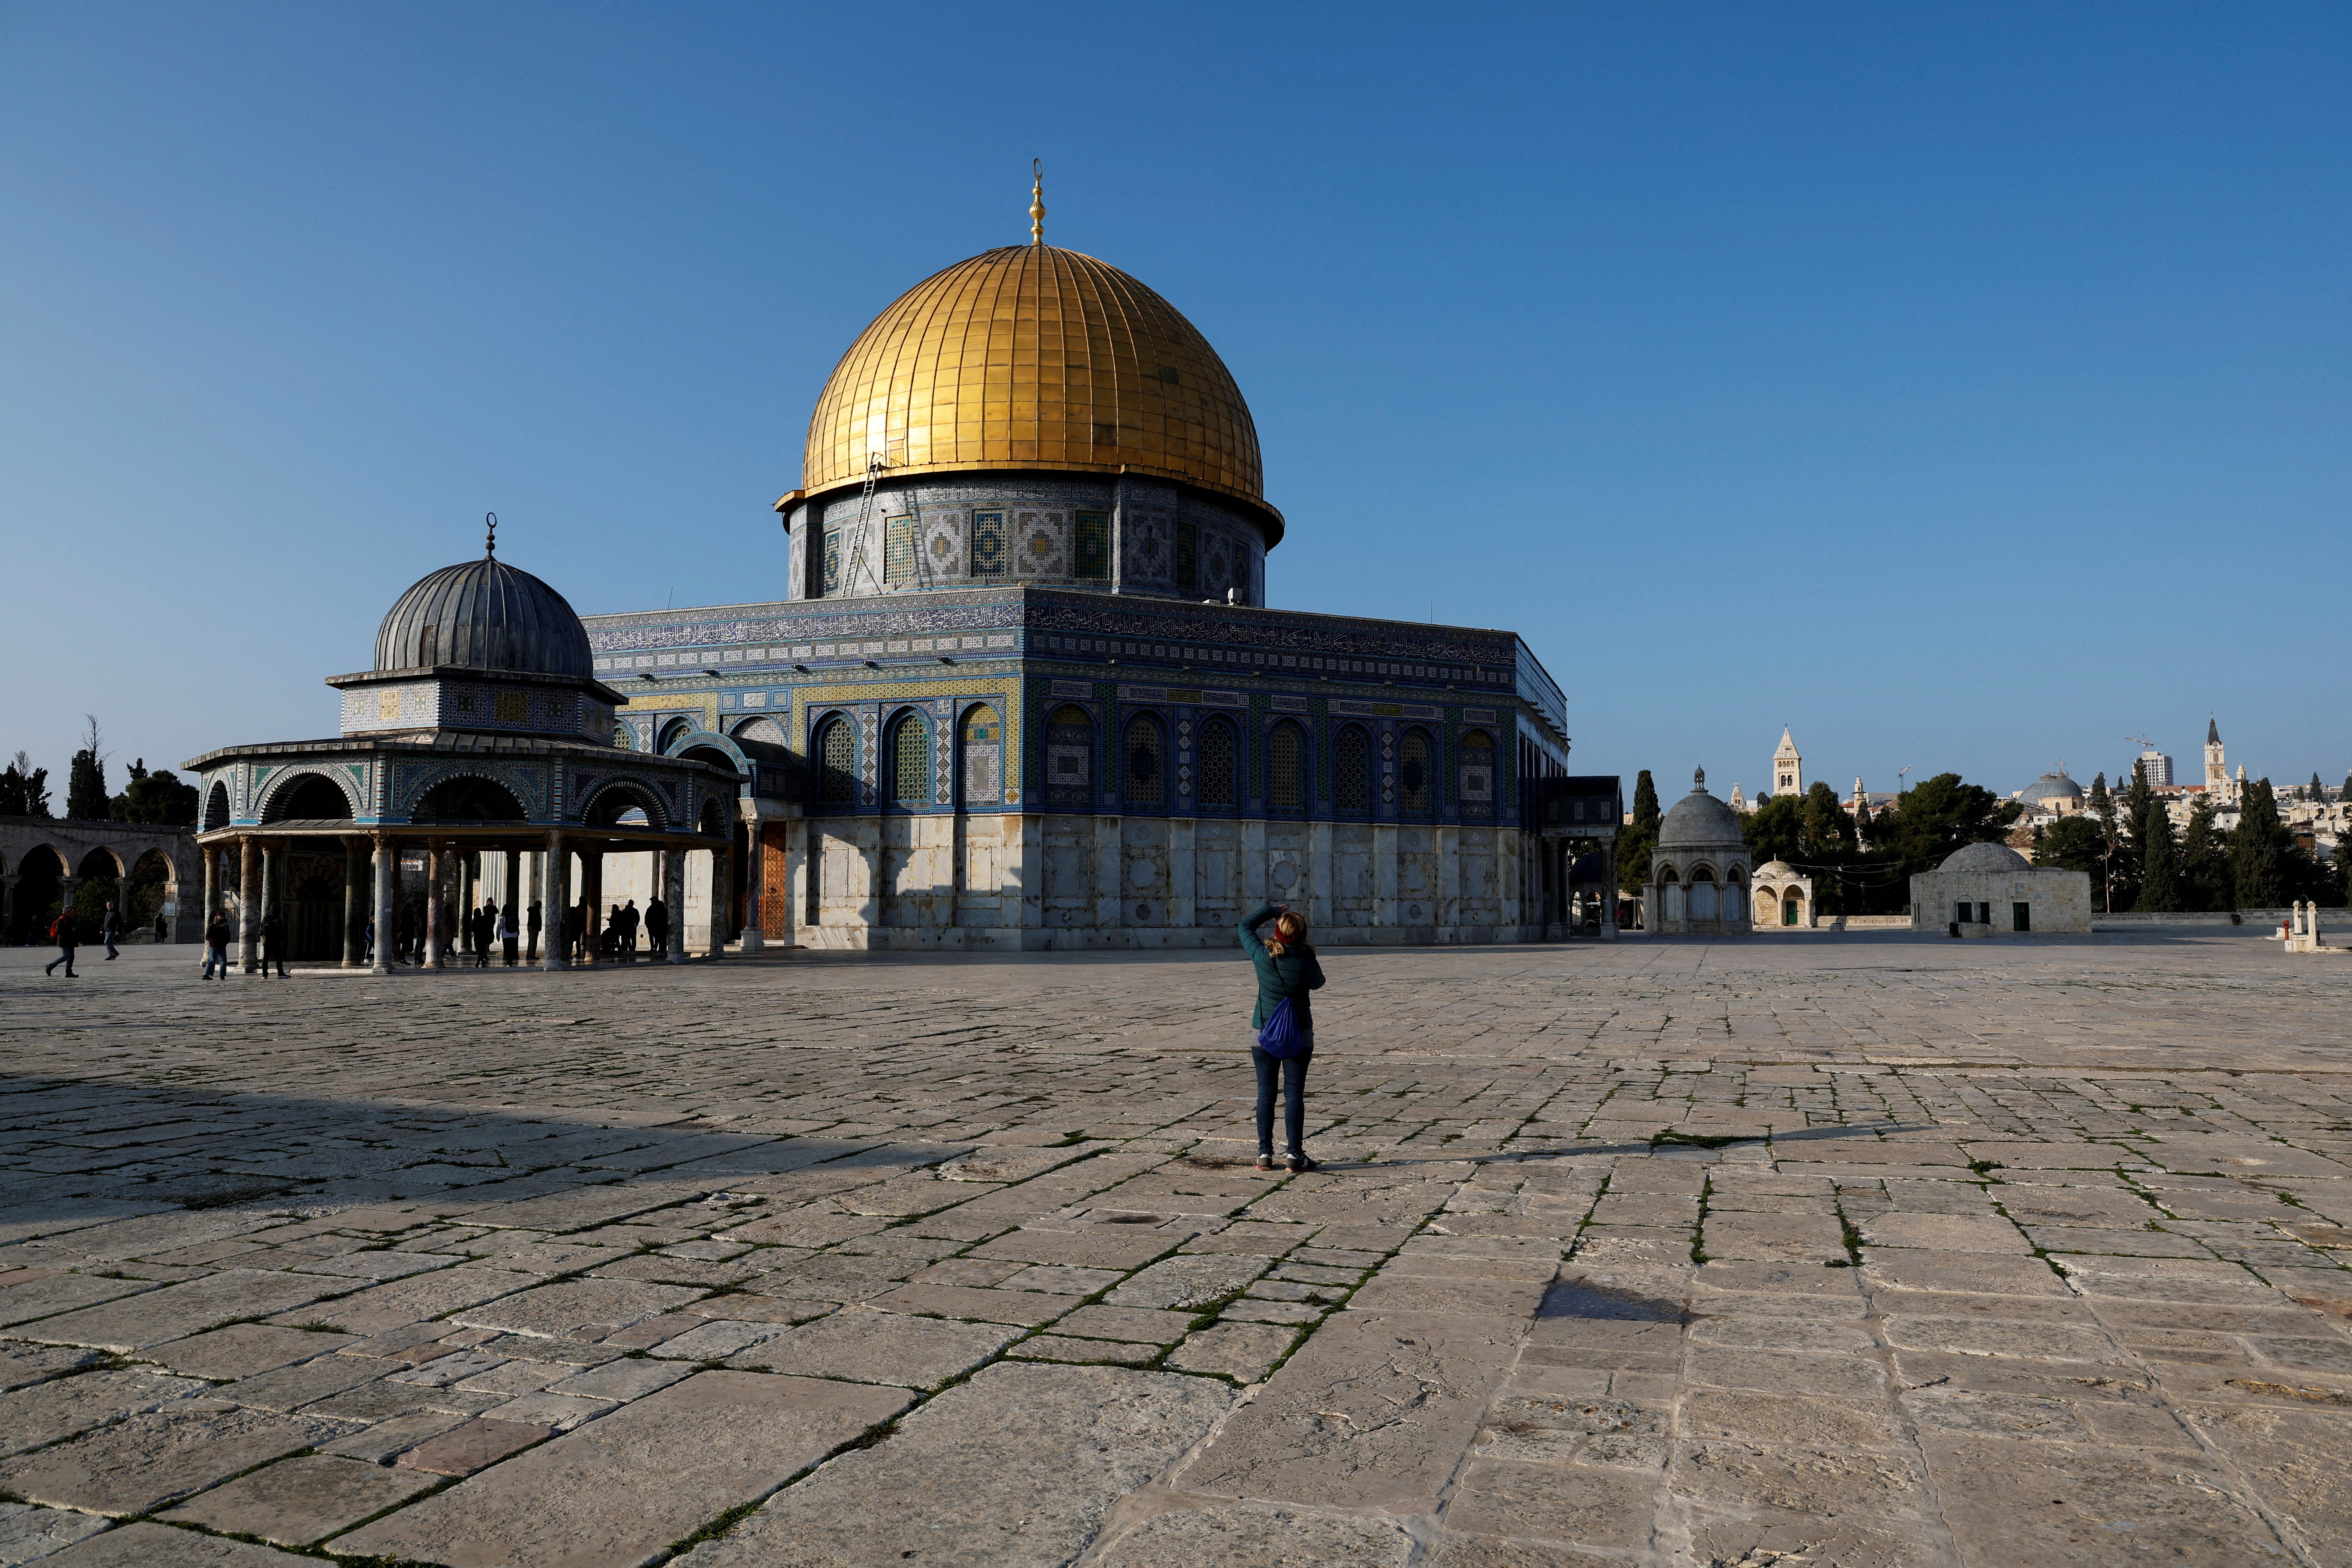 A visitor takes a picture next to the Dome of the Rock on the compound known to Muslims as the Noble Sanctuary and to Jews as the Temple Mount, in Jerusalem's Old City